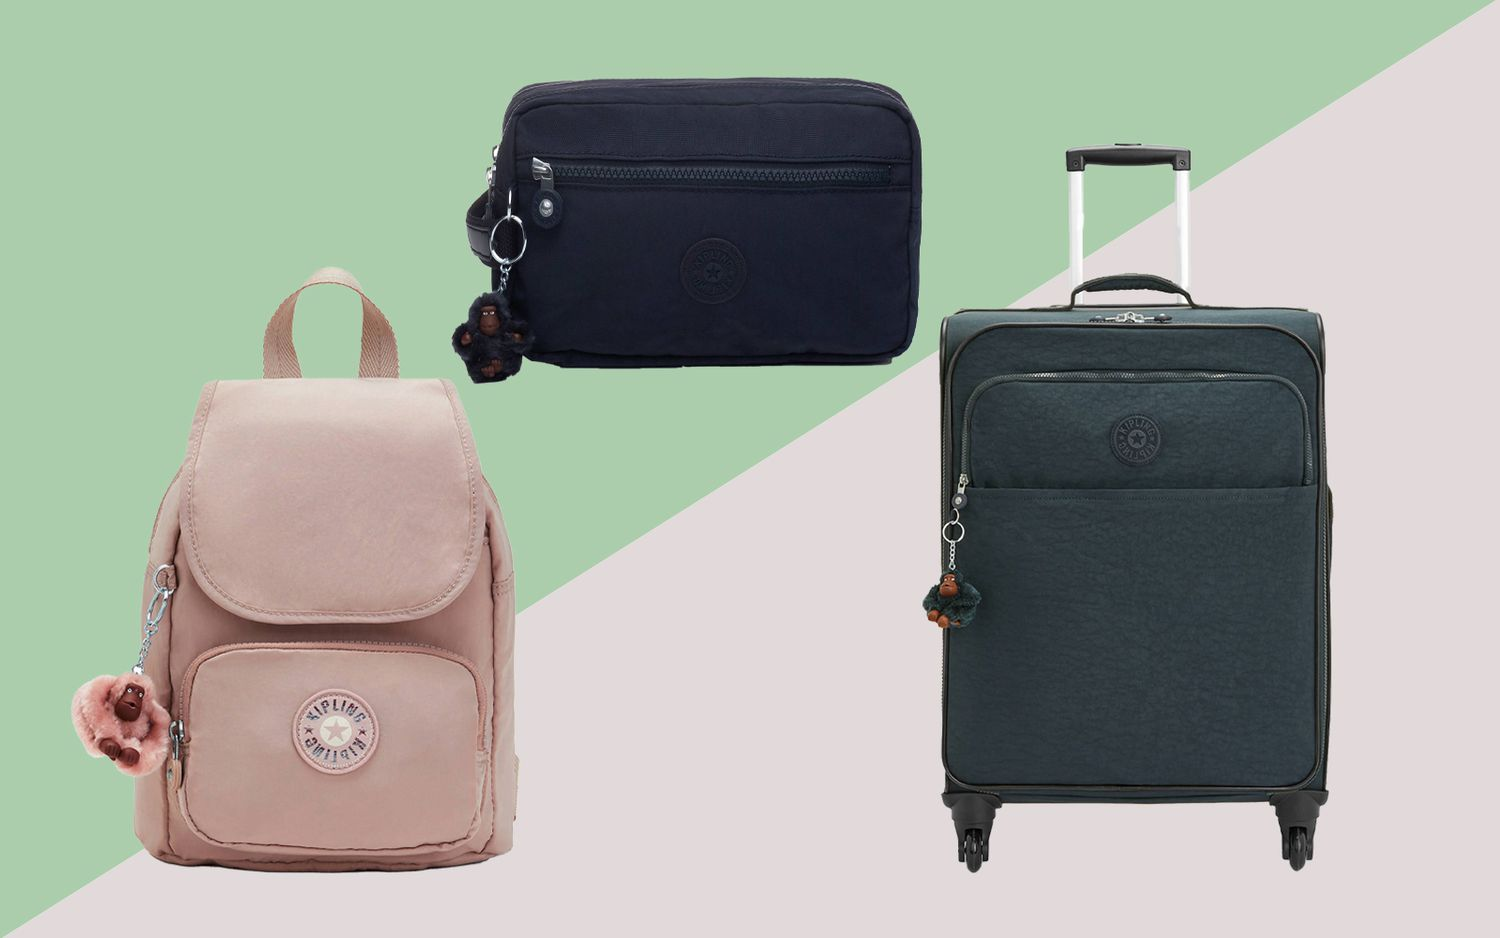 Kipling provides unbeatable deals, offers and cashback on Get Ready for Adventure with Kipling's Travel Bags via OODLZ.